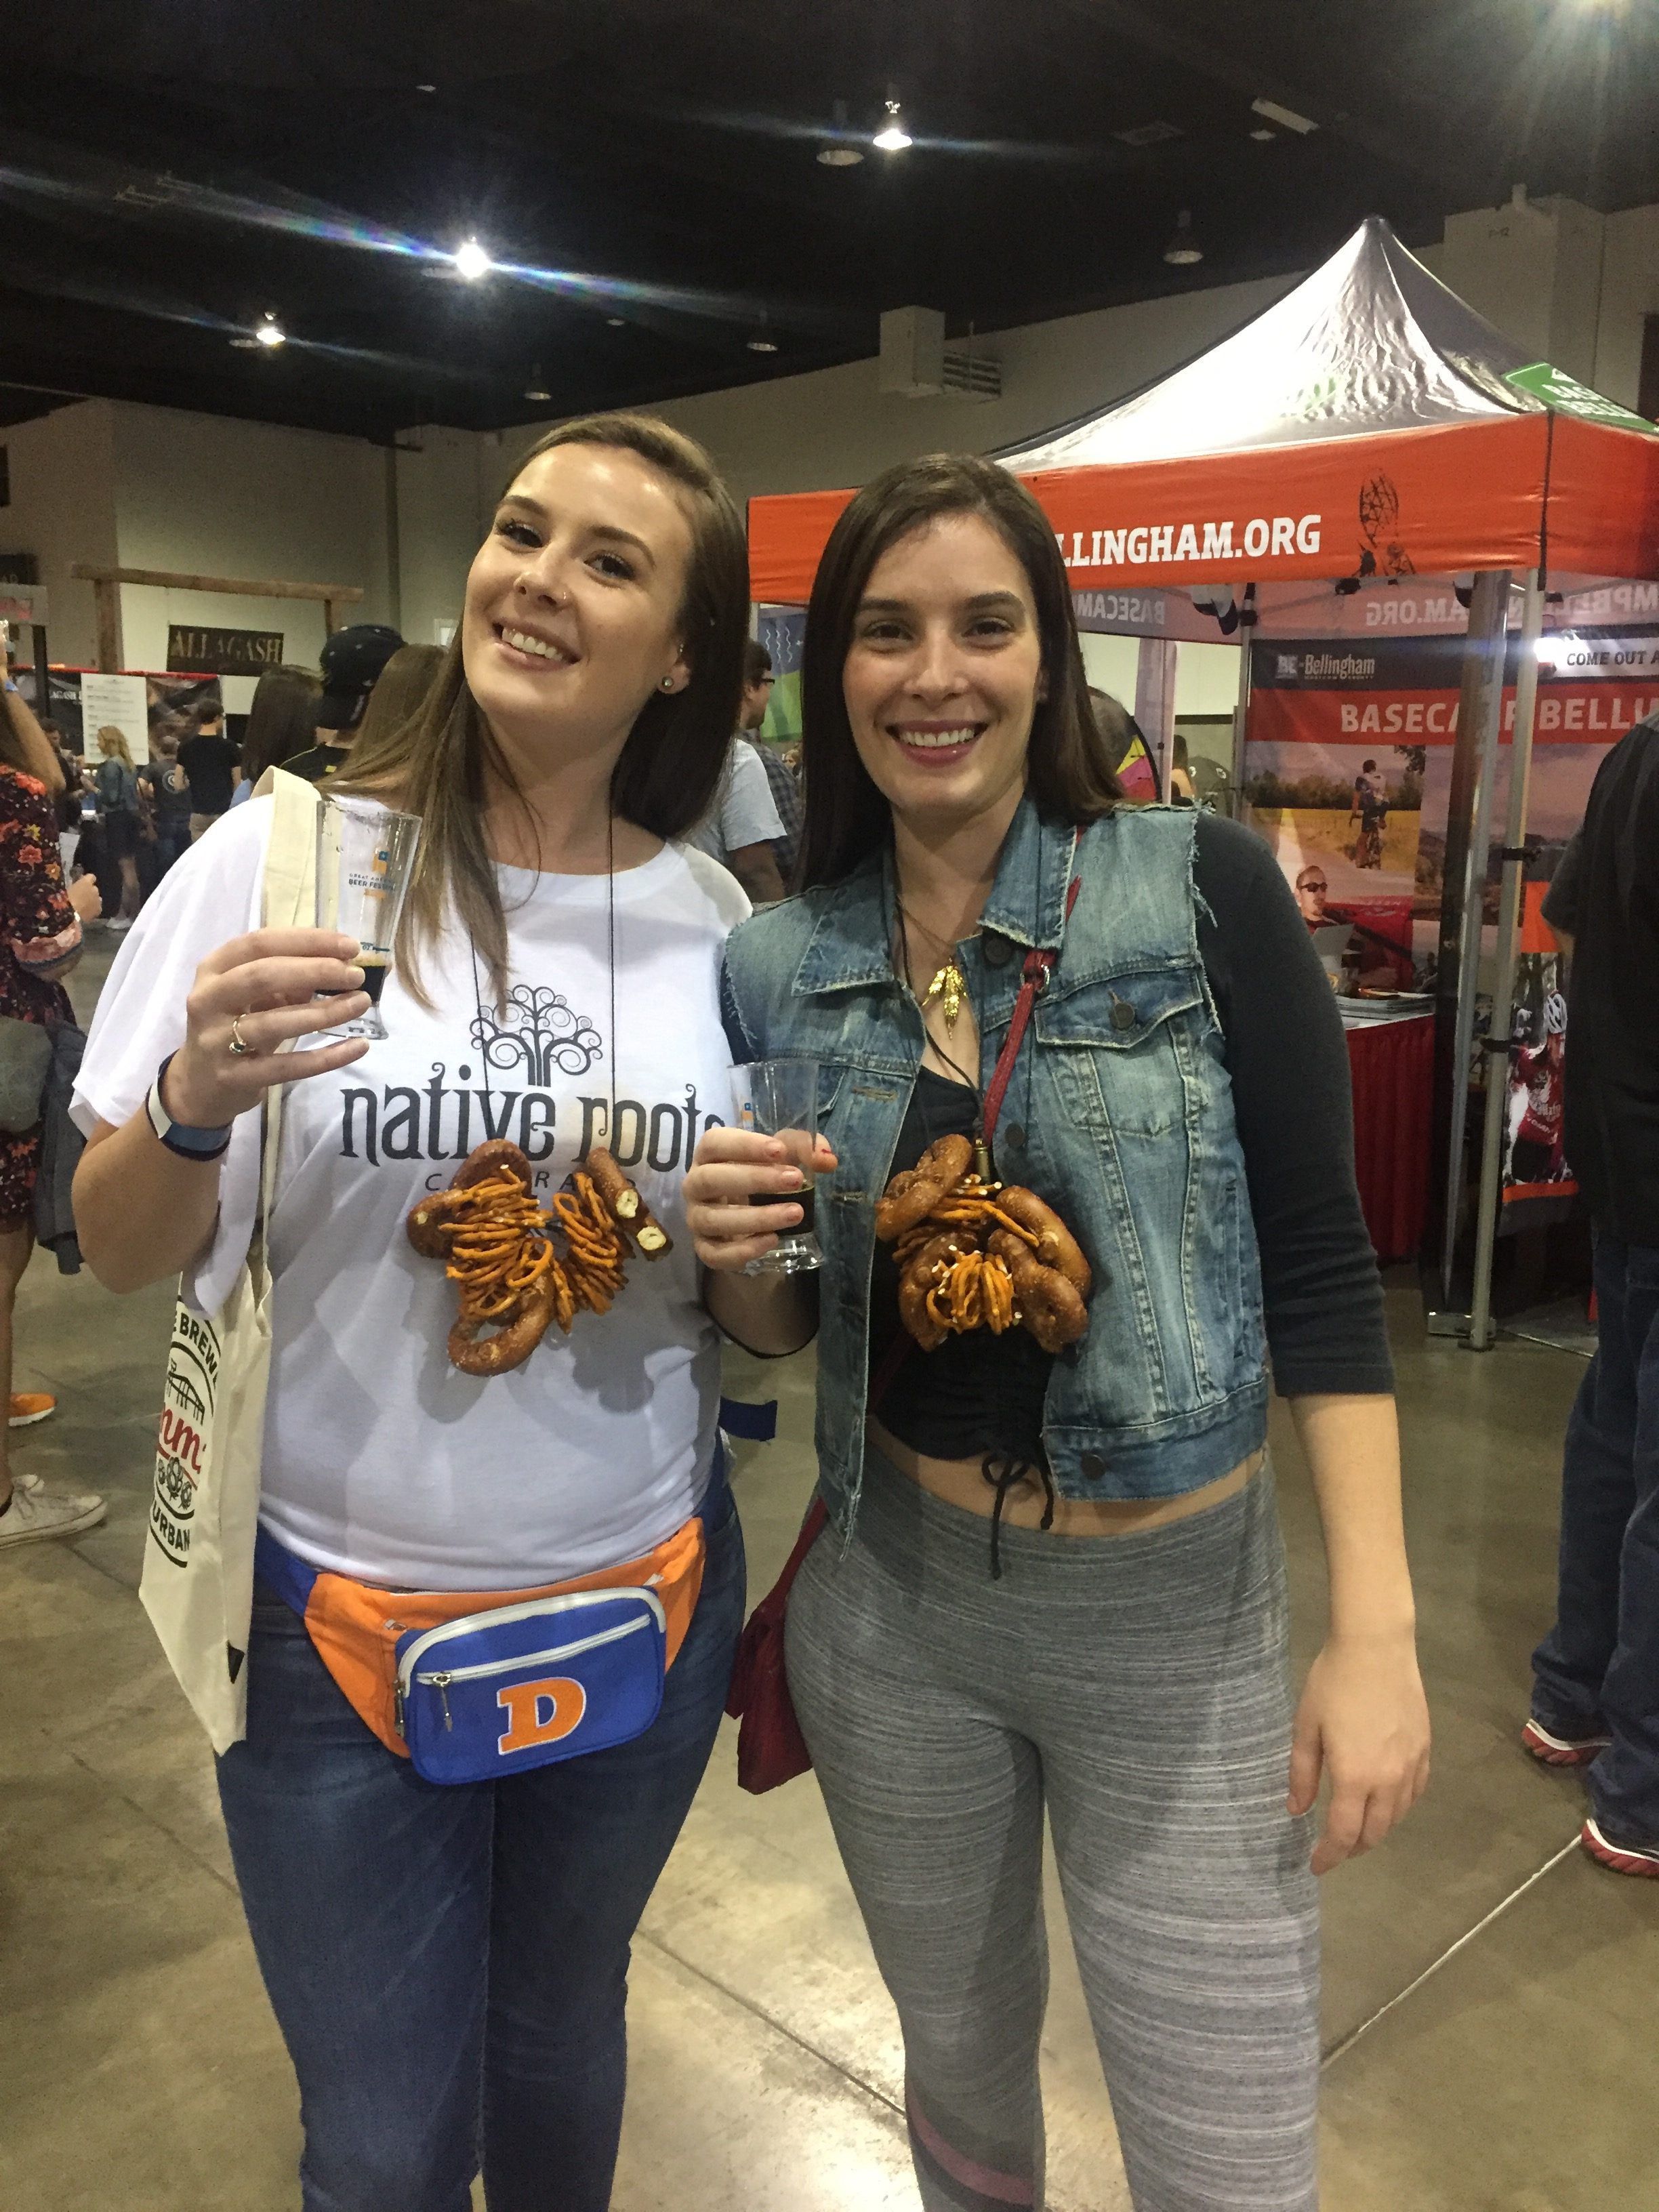 4,000 beers spread over 8 football fields: How to get the most out of Great  American Beer Festival 2018 – The Denver Post